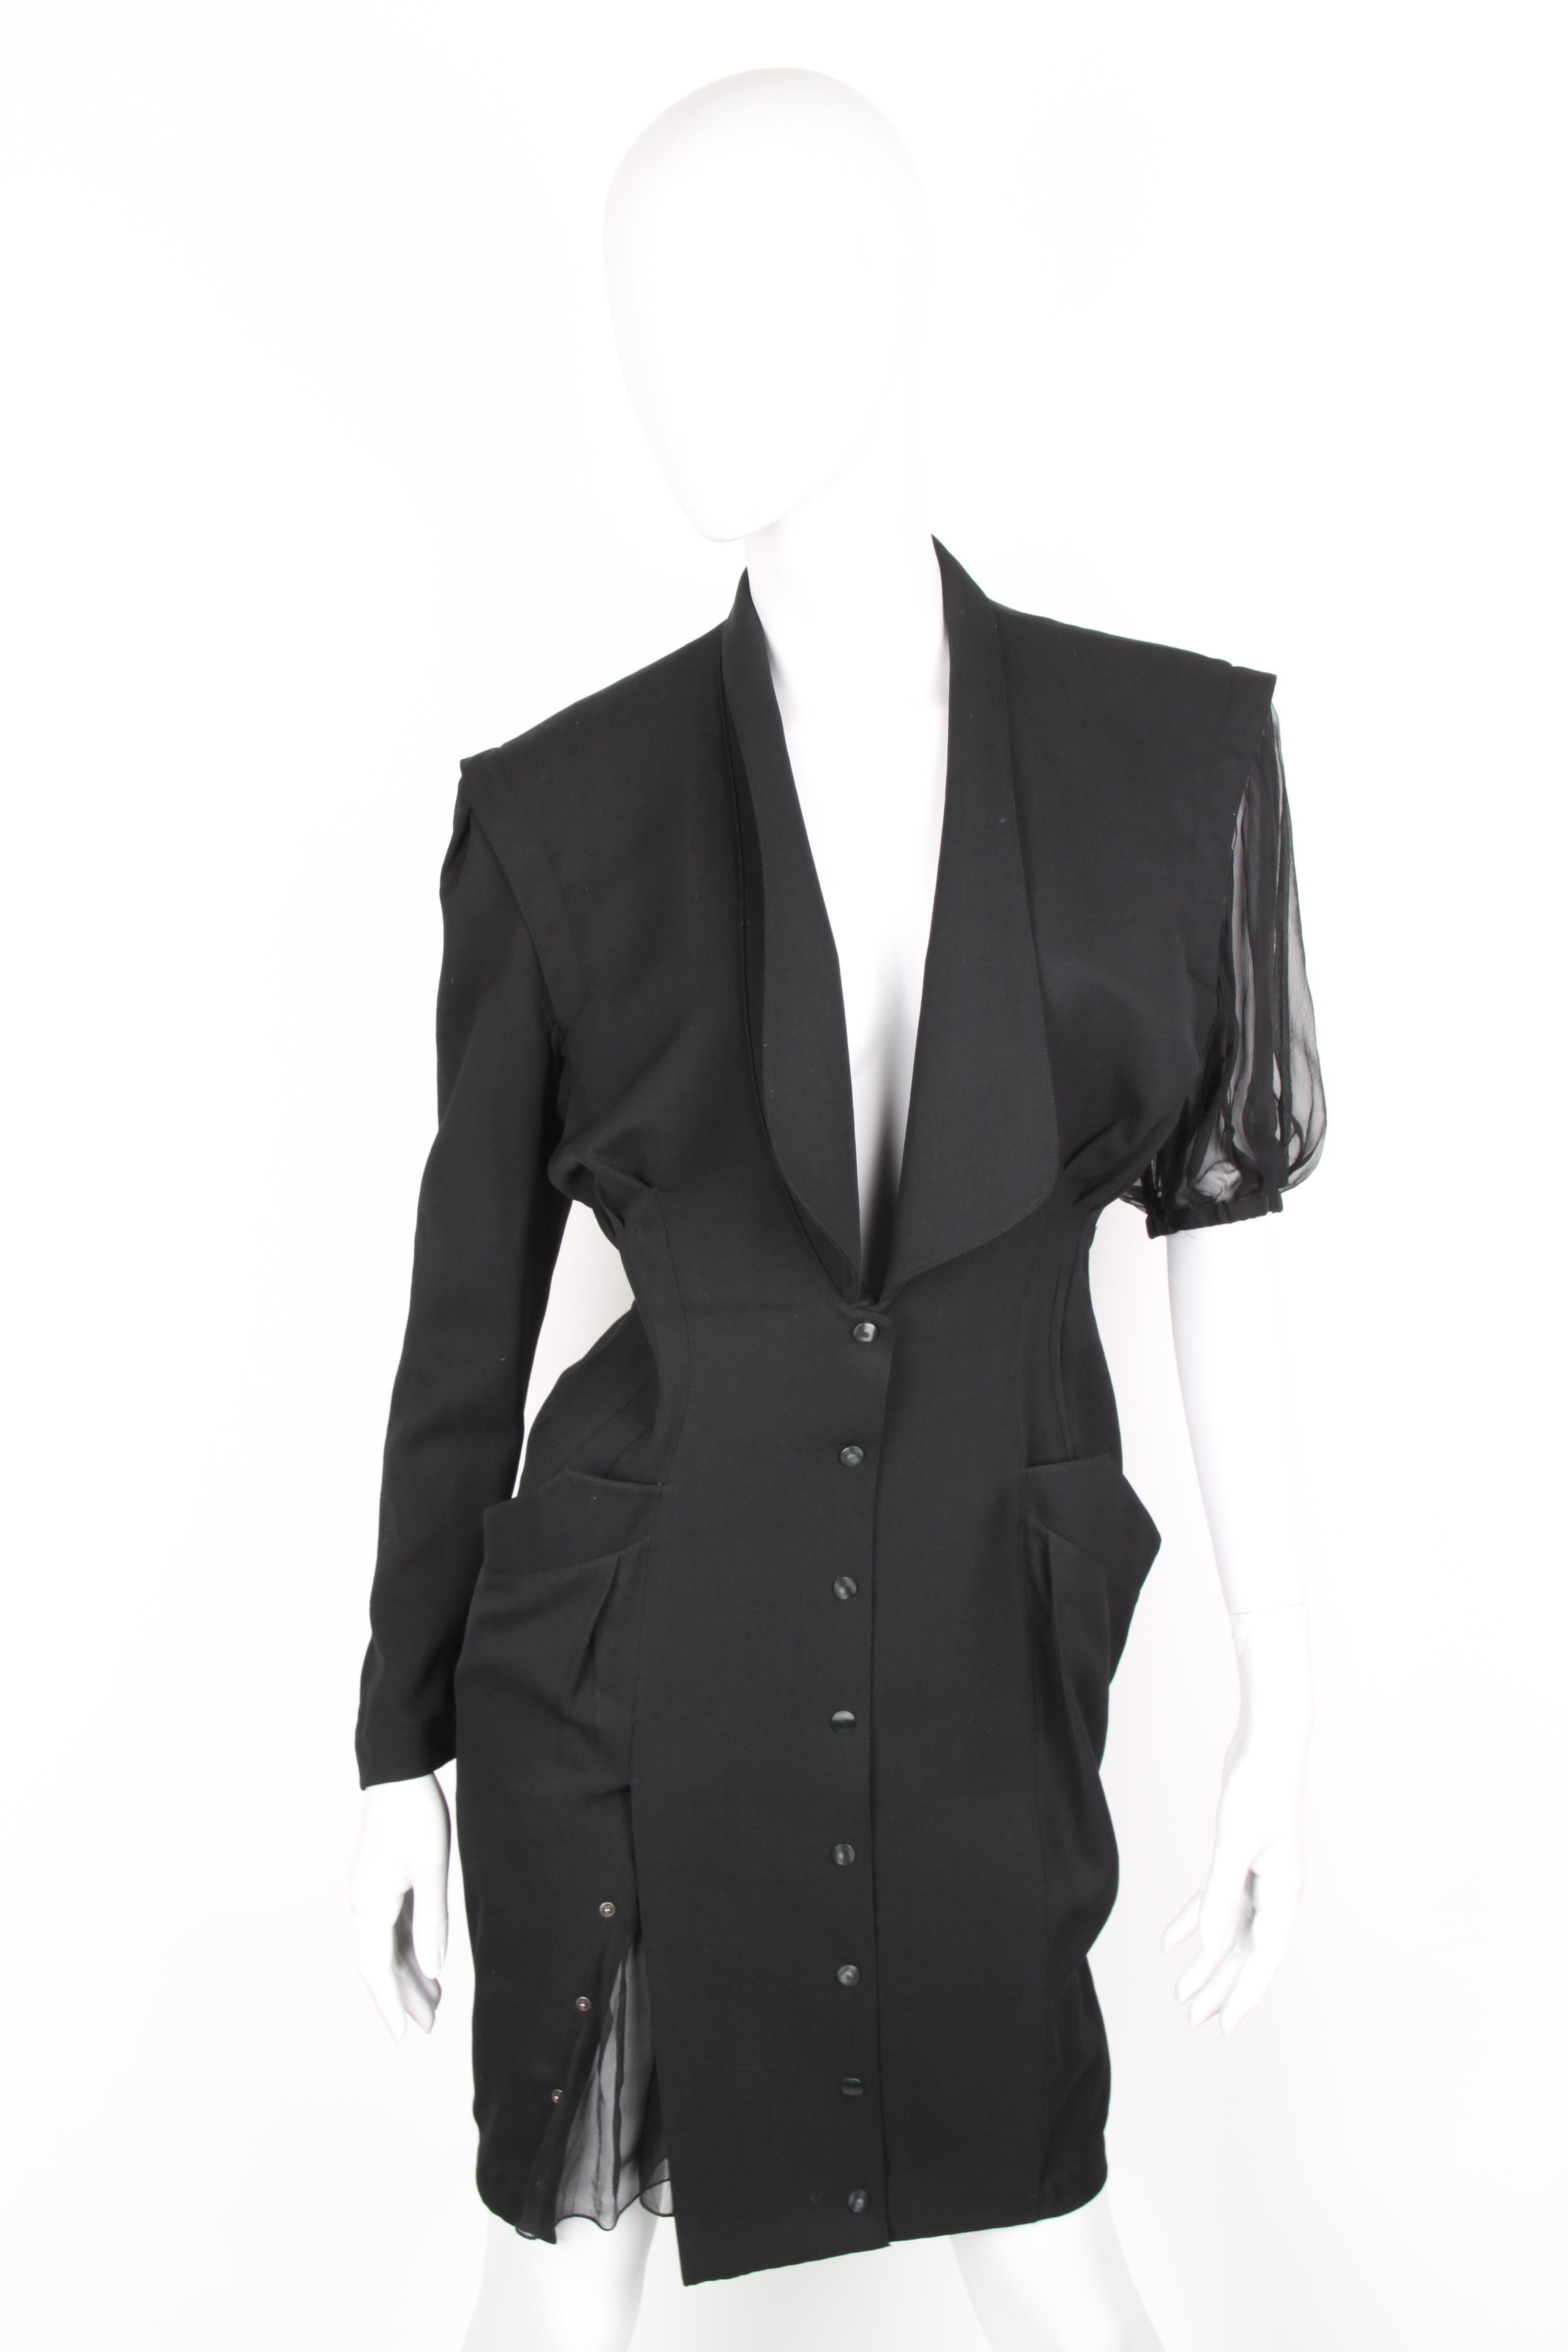 Thierry Mugler Black Knee Length Detachable Sleeves Dress In Excellent Condition For Sale In Baarn, NL